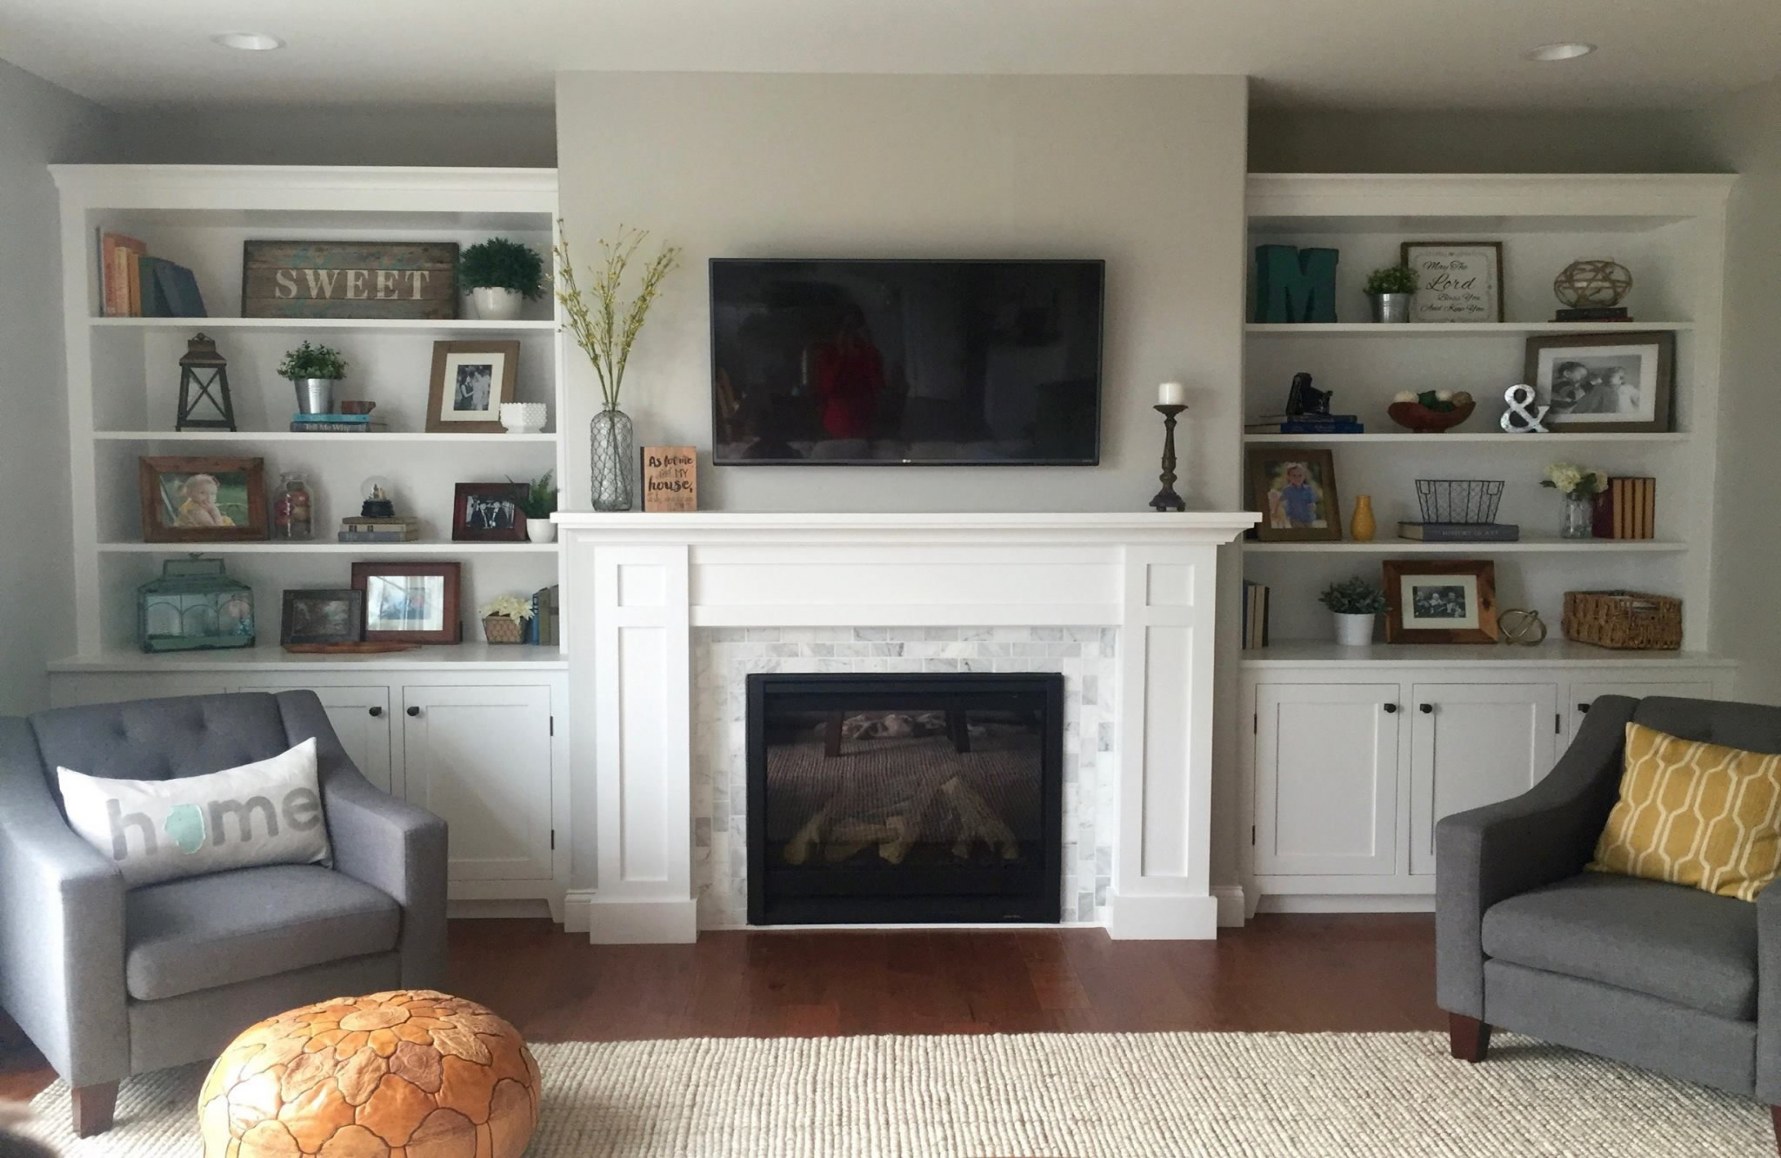 How to Build A Brick Fireplace Best Of White Washed Brick Fireplace Fireplace Built In Cabinets